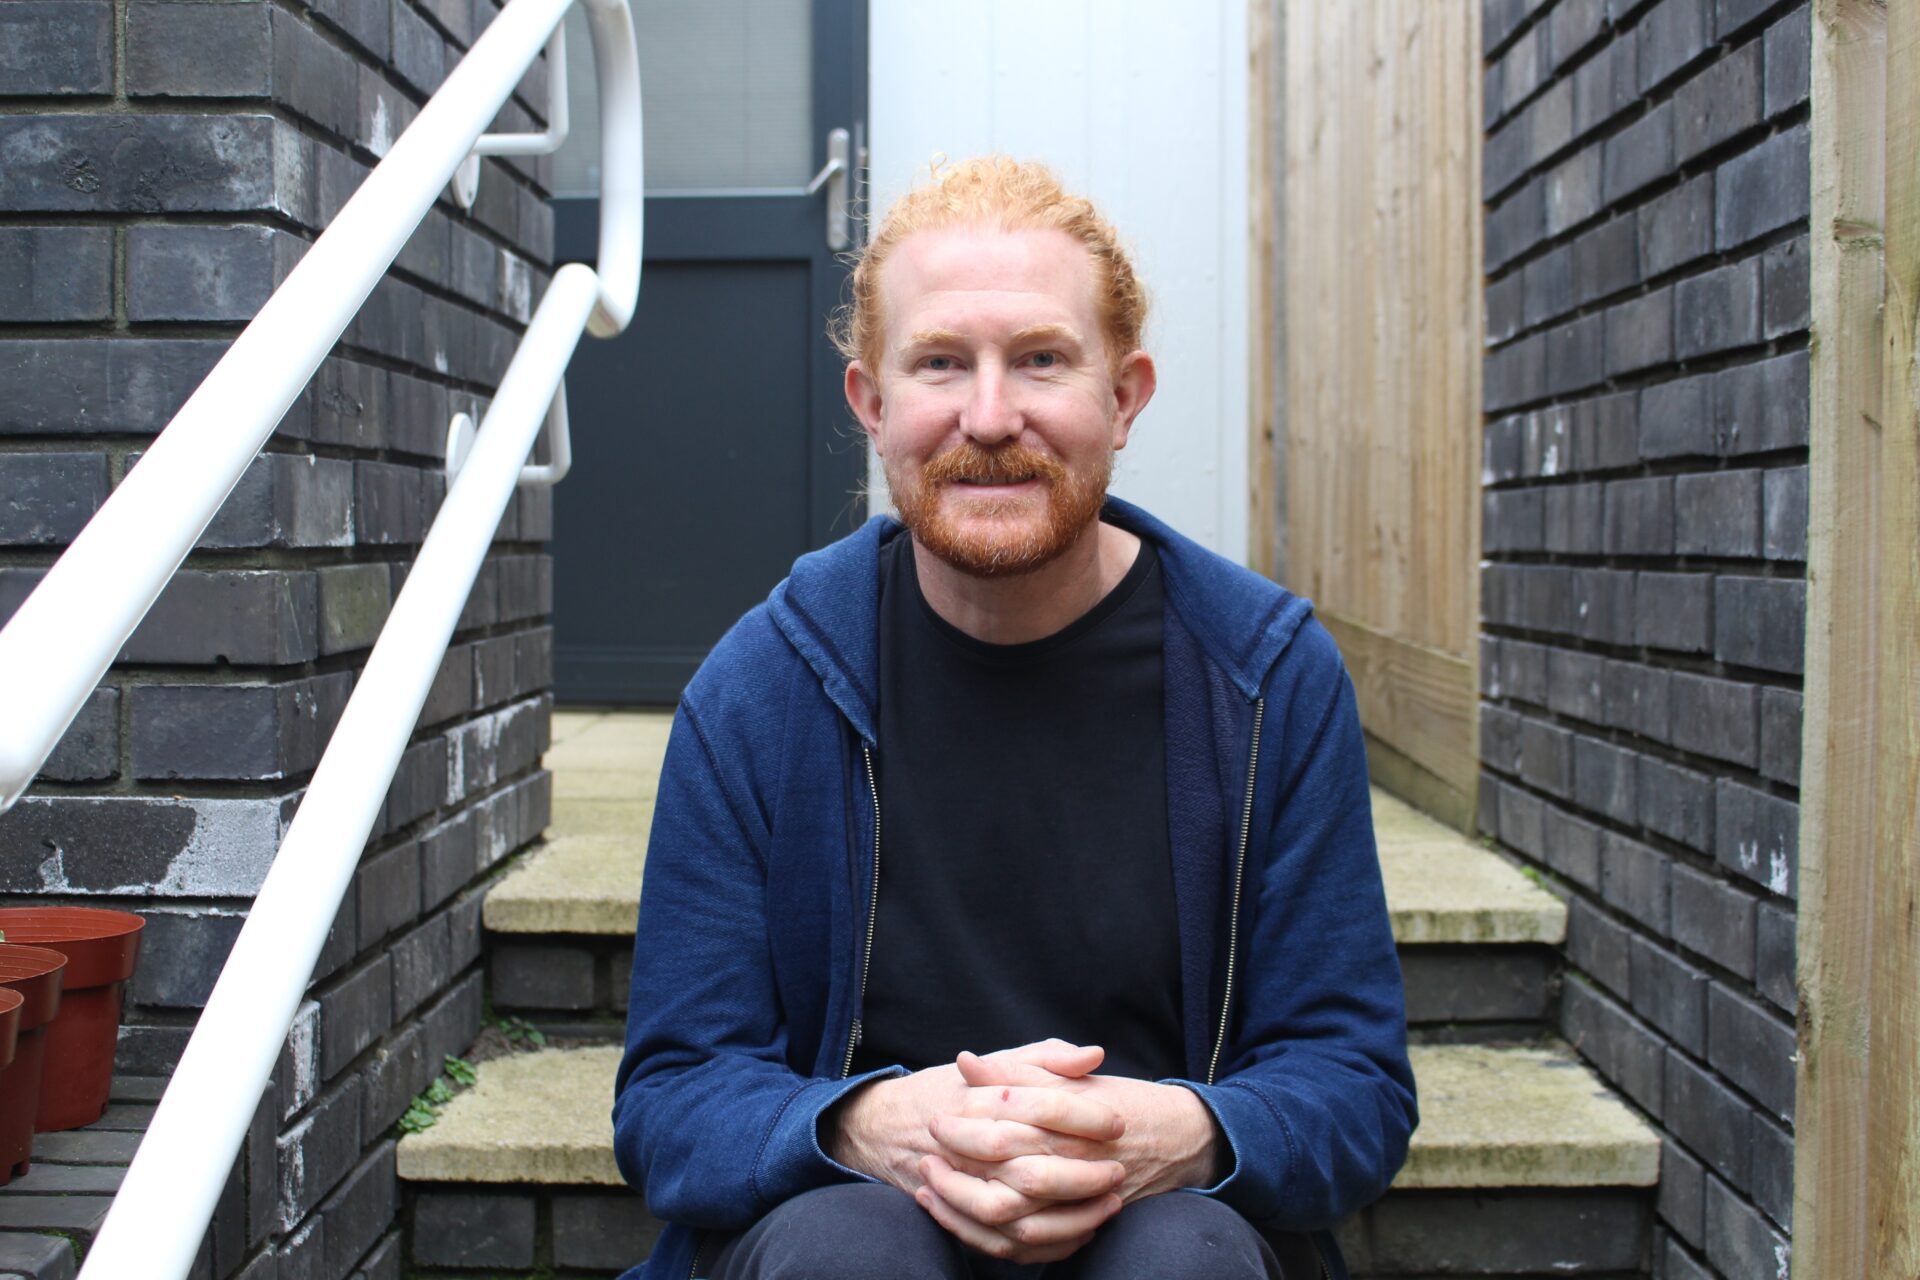 A man with red hair and beard sits on the steps of a learning disability support service